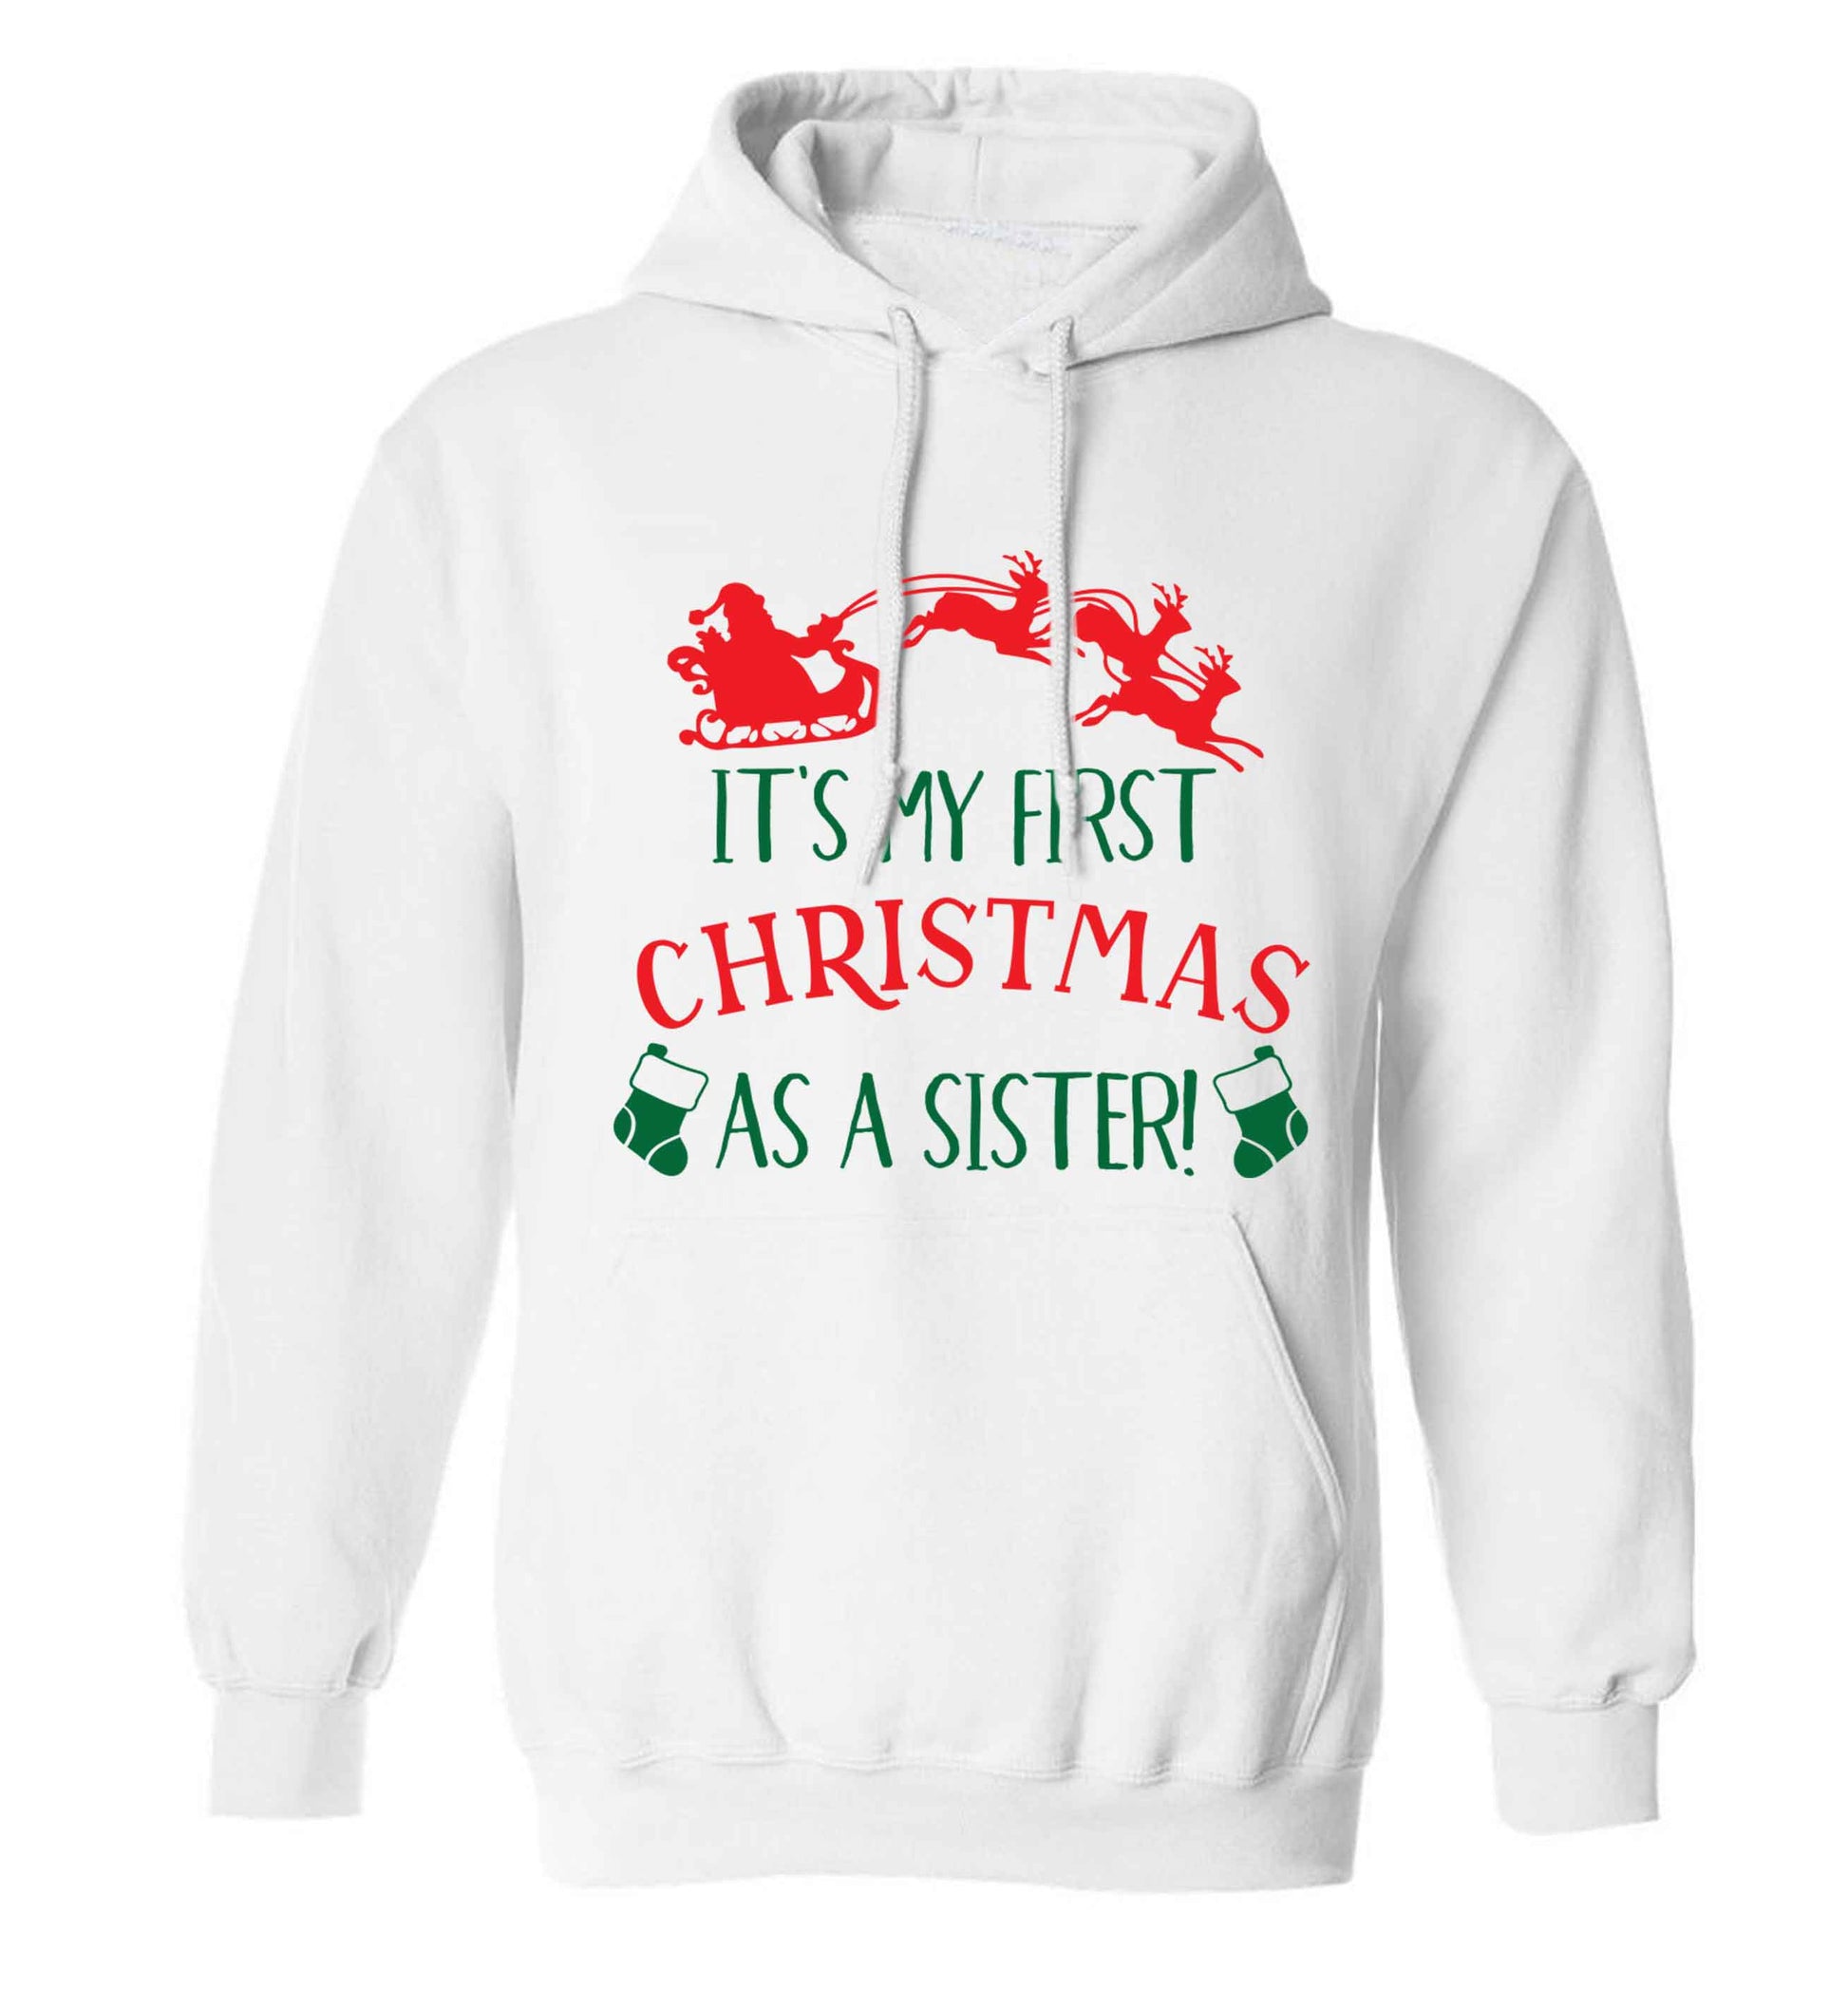 It's my first Christmas as a sister! adults unisex white hoodie 2XL